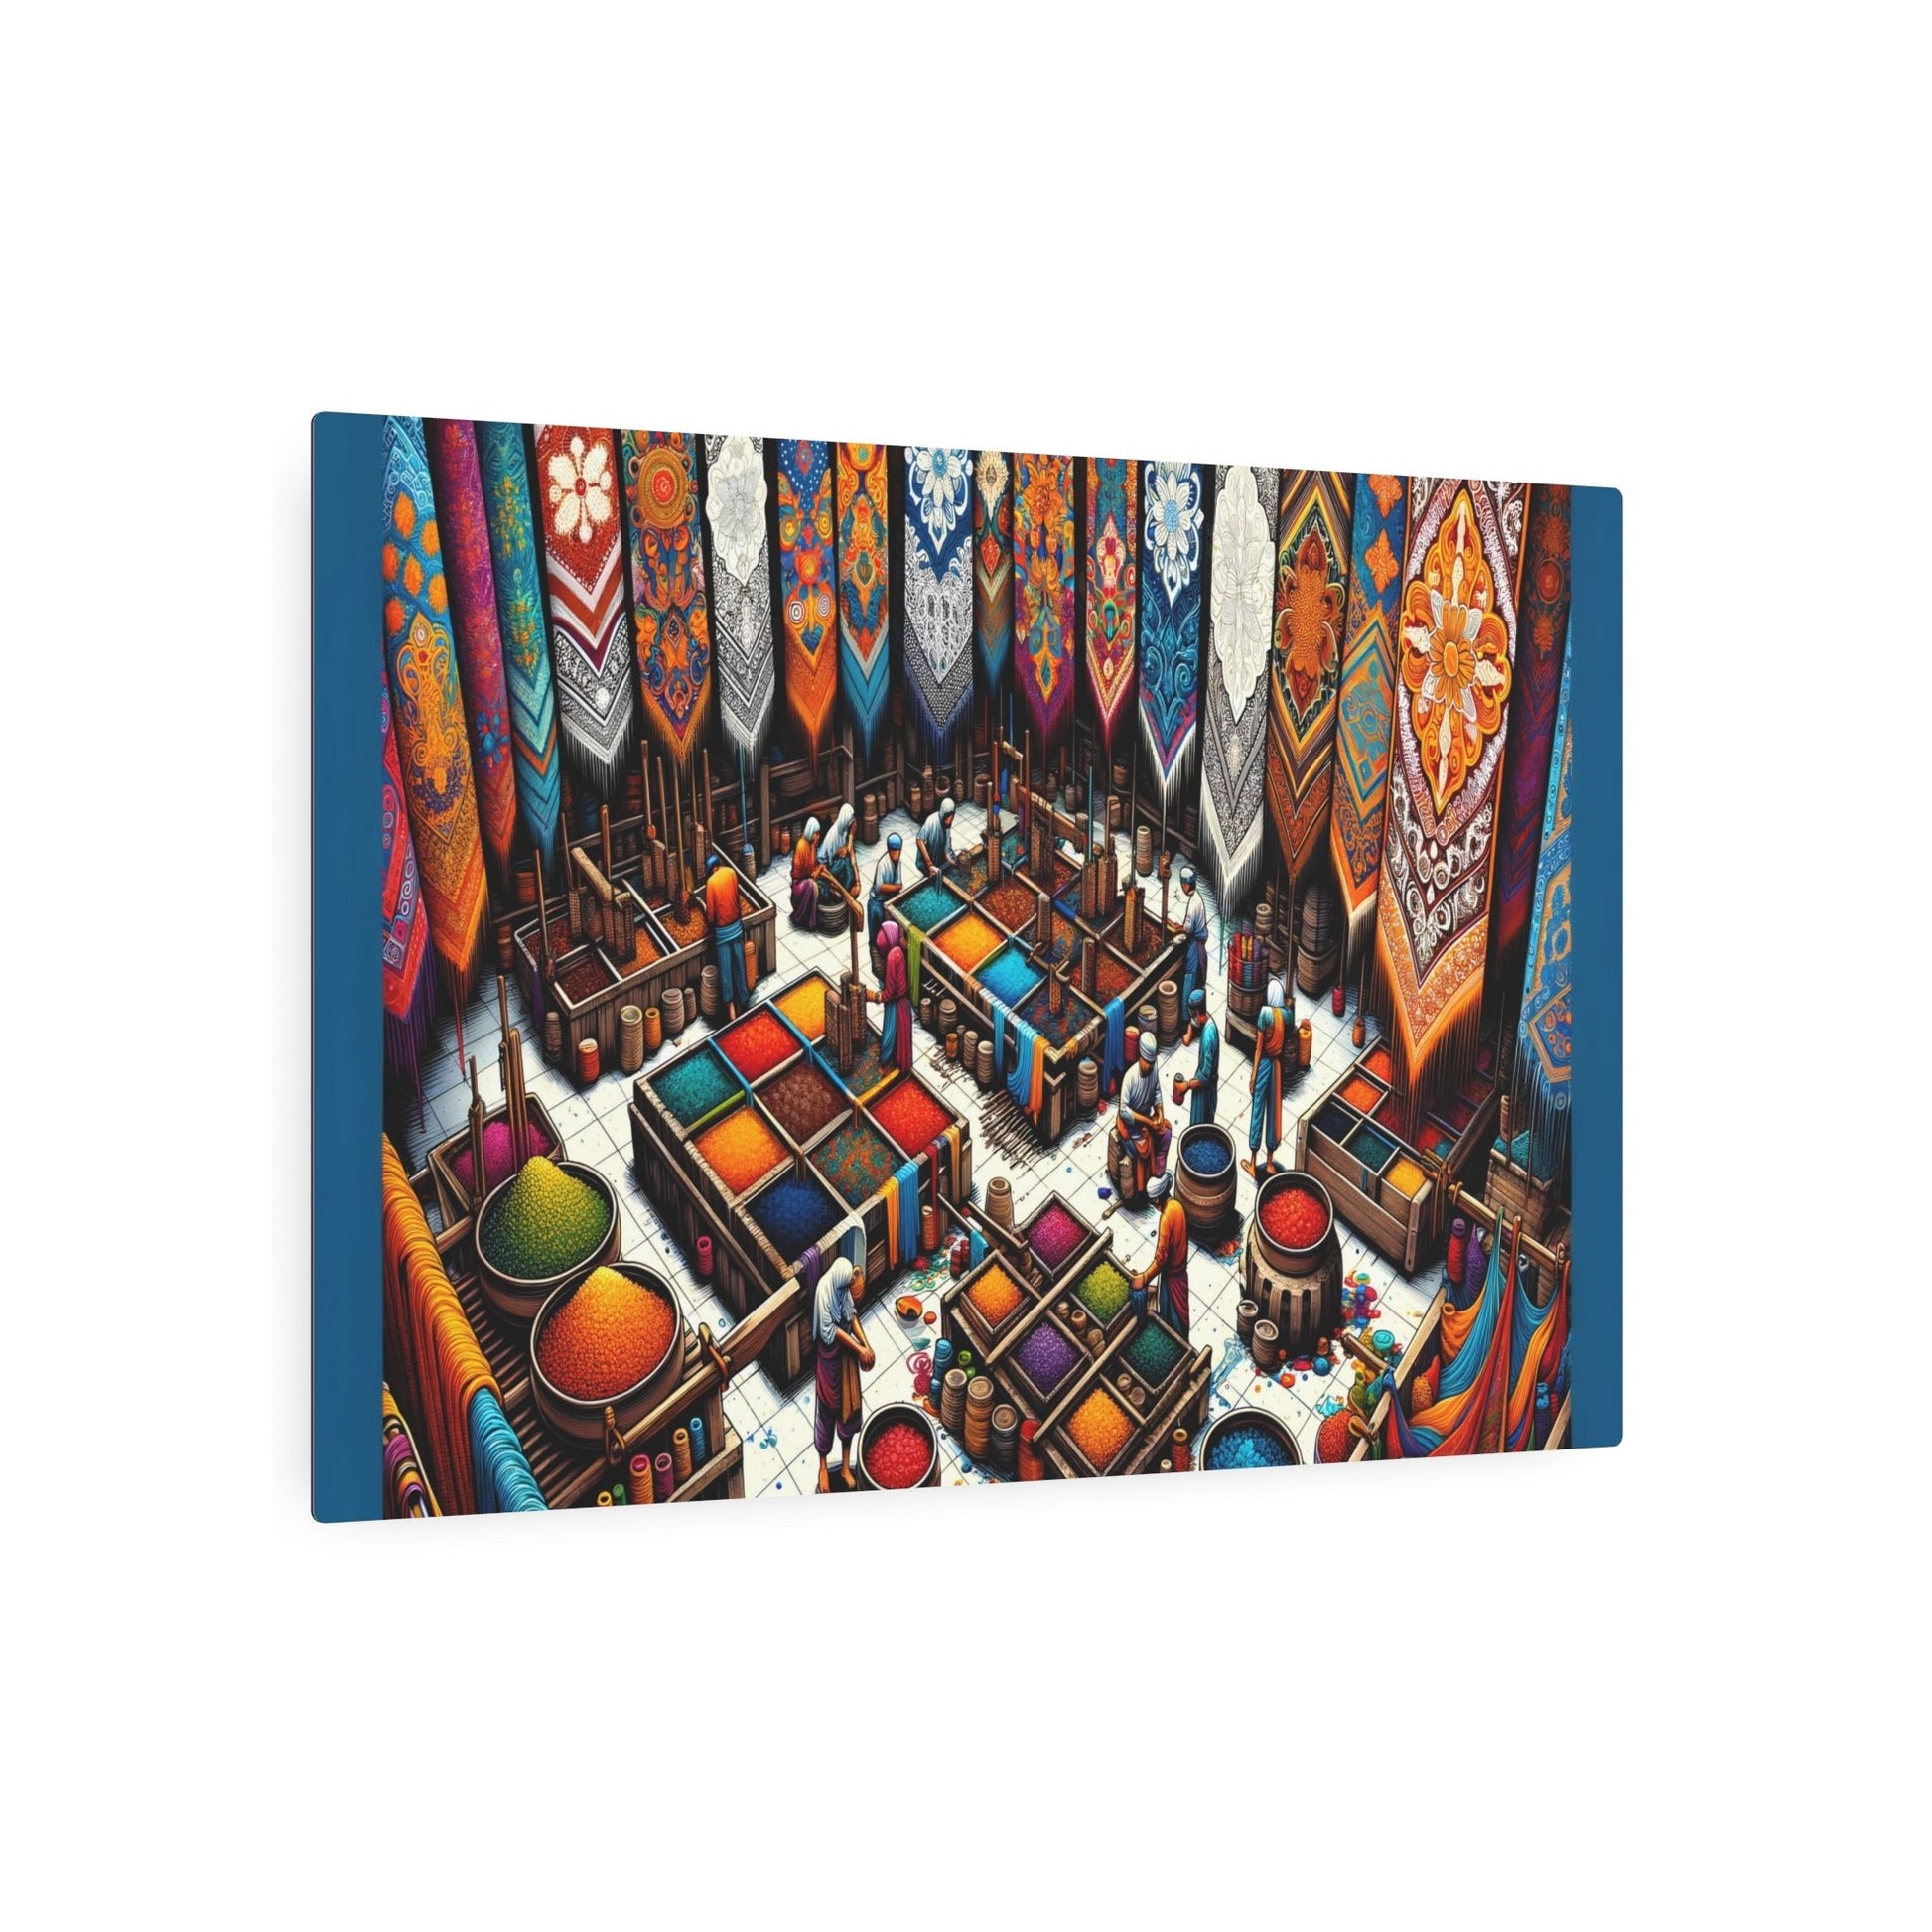 "Vibrant Indonesian Batik Art - Traditional Scene with Intricate Patterns in Global Styles Collection" - Metal Poster Art 36″ x 24″ (Horizontal) 0.12''